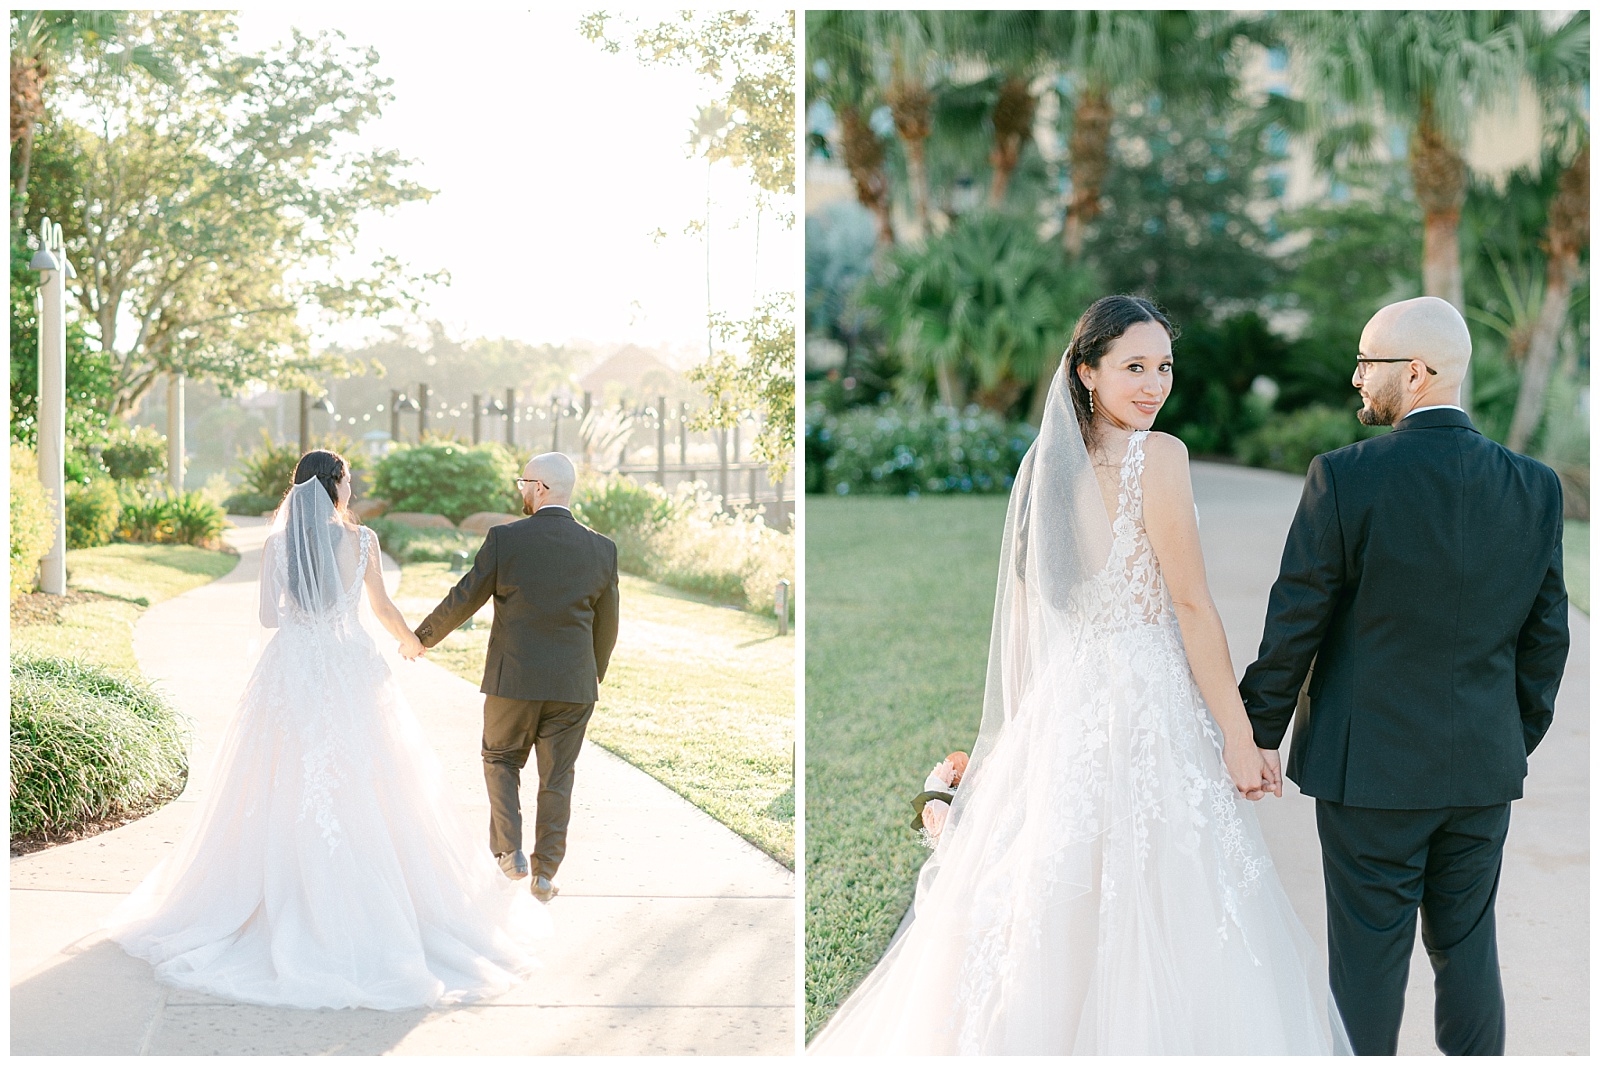 Left: Bride and Groom heading back towards hotel after morning couple portraits
Right: Groom admiring bride on their walk back to Disney's Riviera Resort
By Elizabeth Kane Photography in Orlando Florida